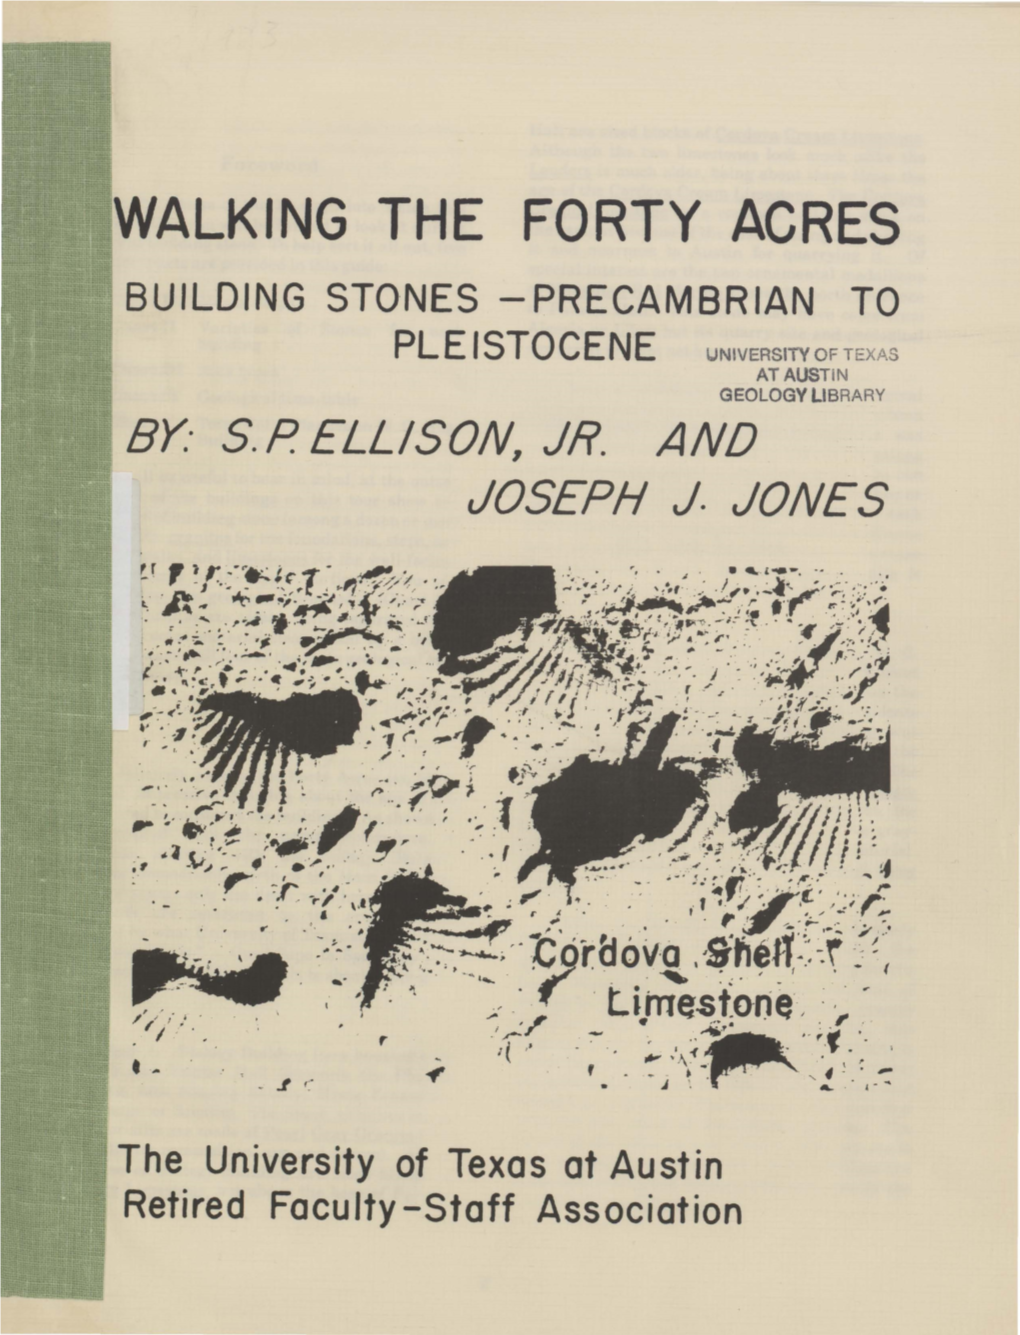 Walking the Forty Acres Building Stones -Precambrian To